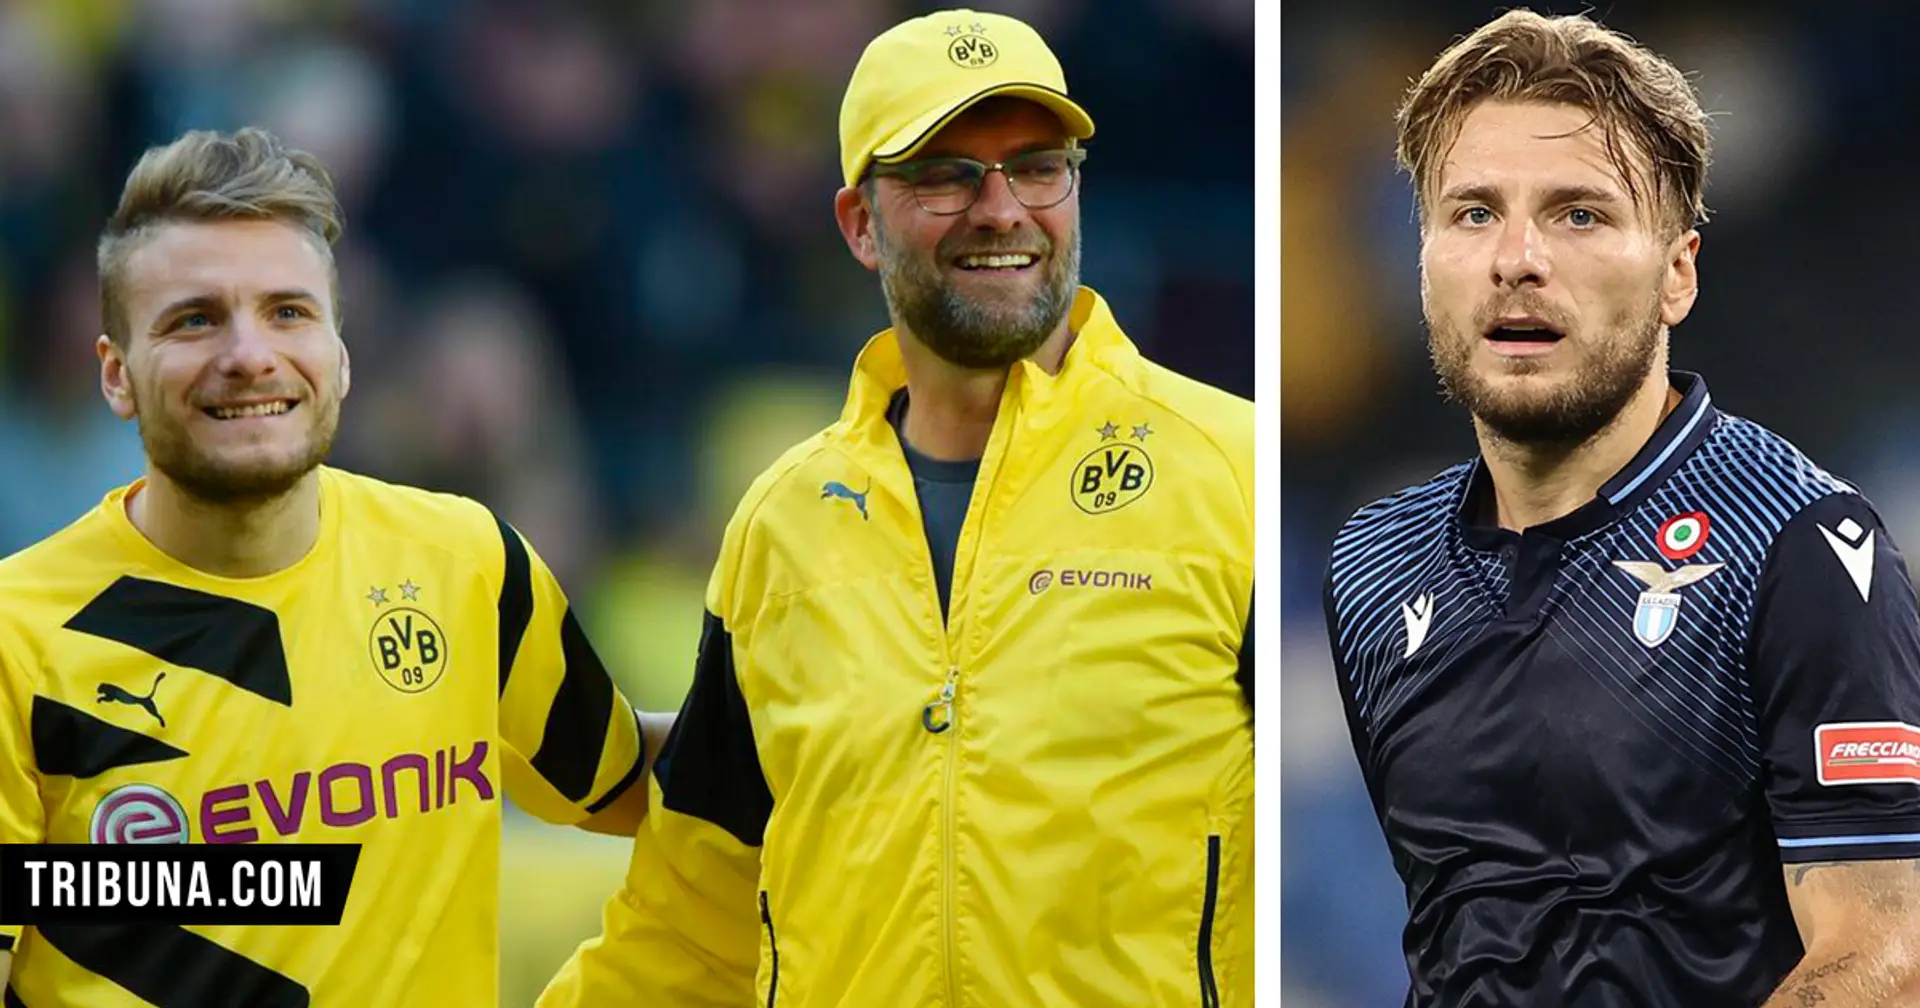 Ciro Immobile explains why he will never forget Jurgen Klopp despite playing just one season under him